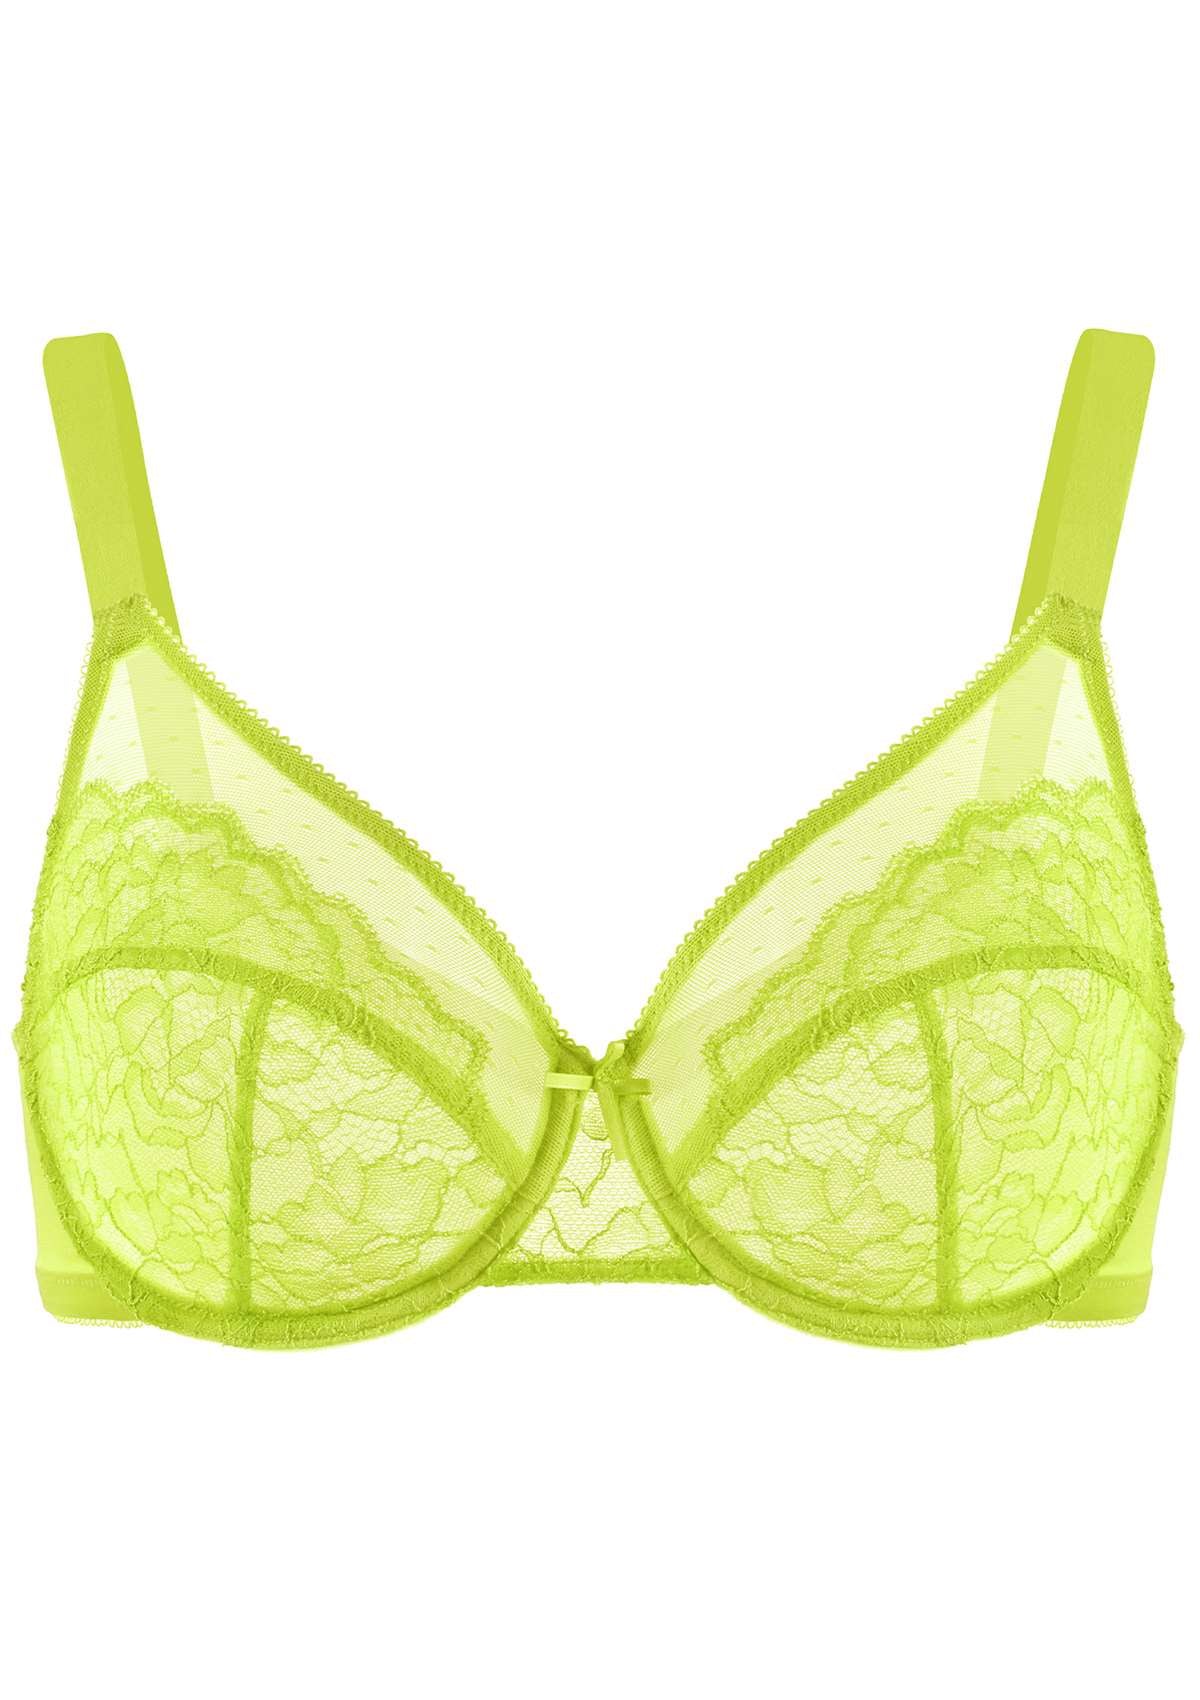 HSIA Enchante Full Cup Minimizing Bra: Supportive Unlined Lace Bra - Lime Green / 42 / DD/E